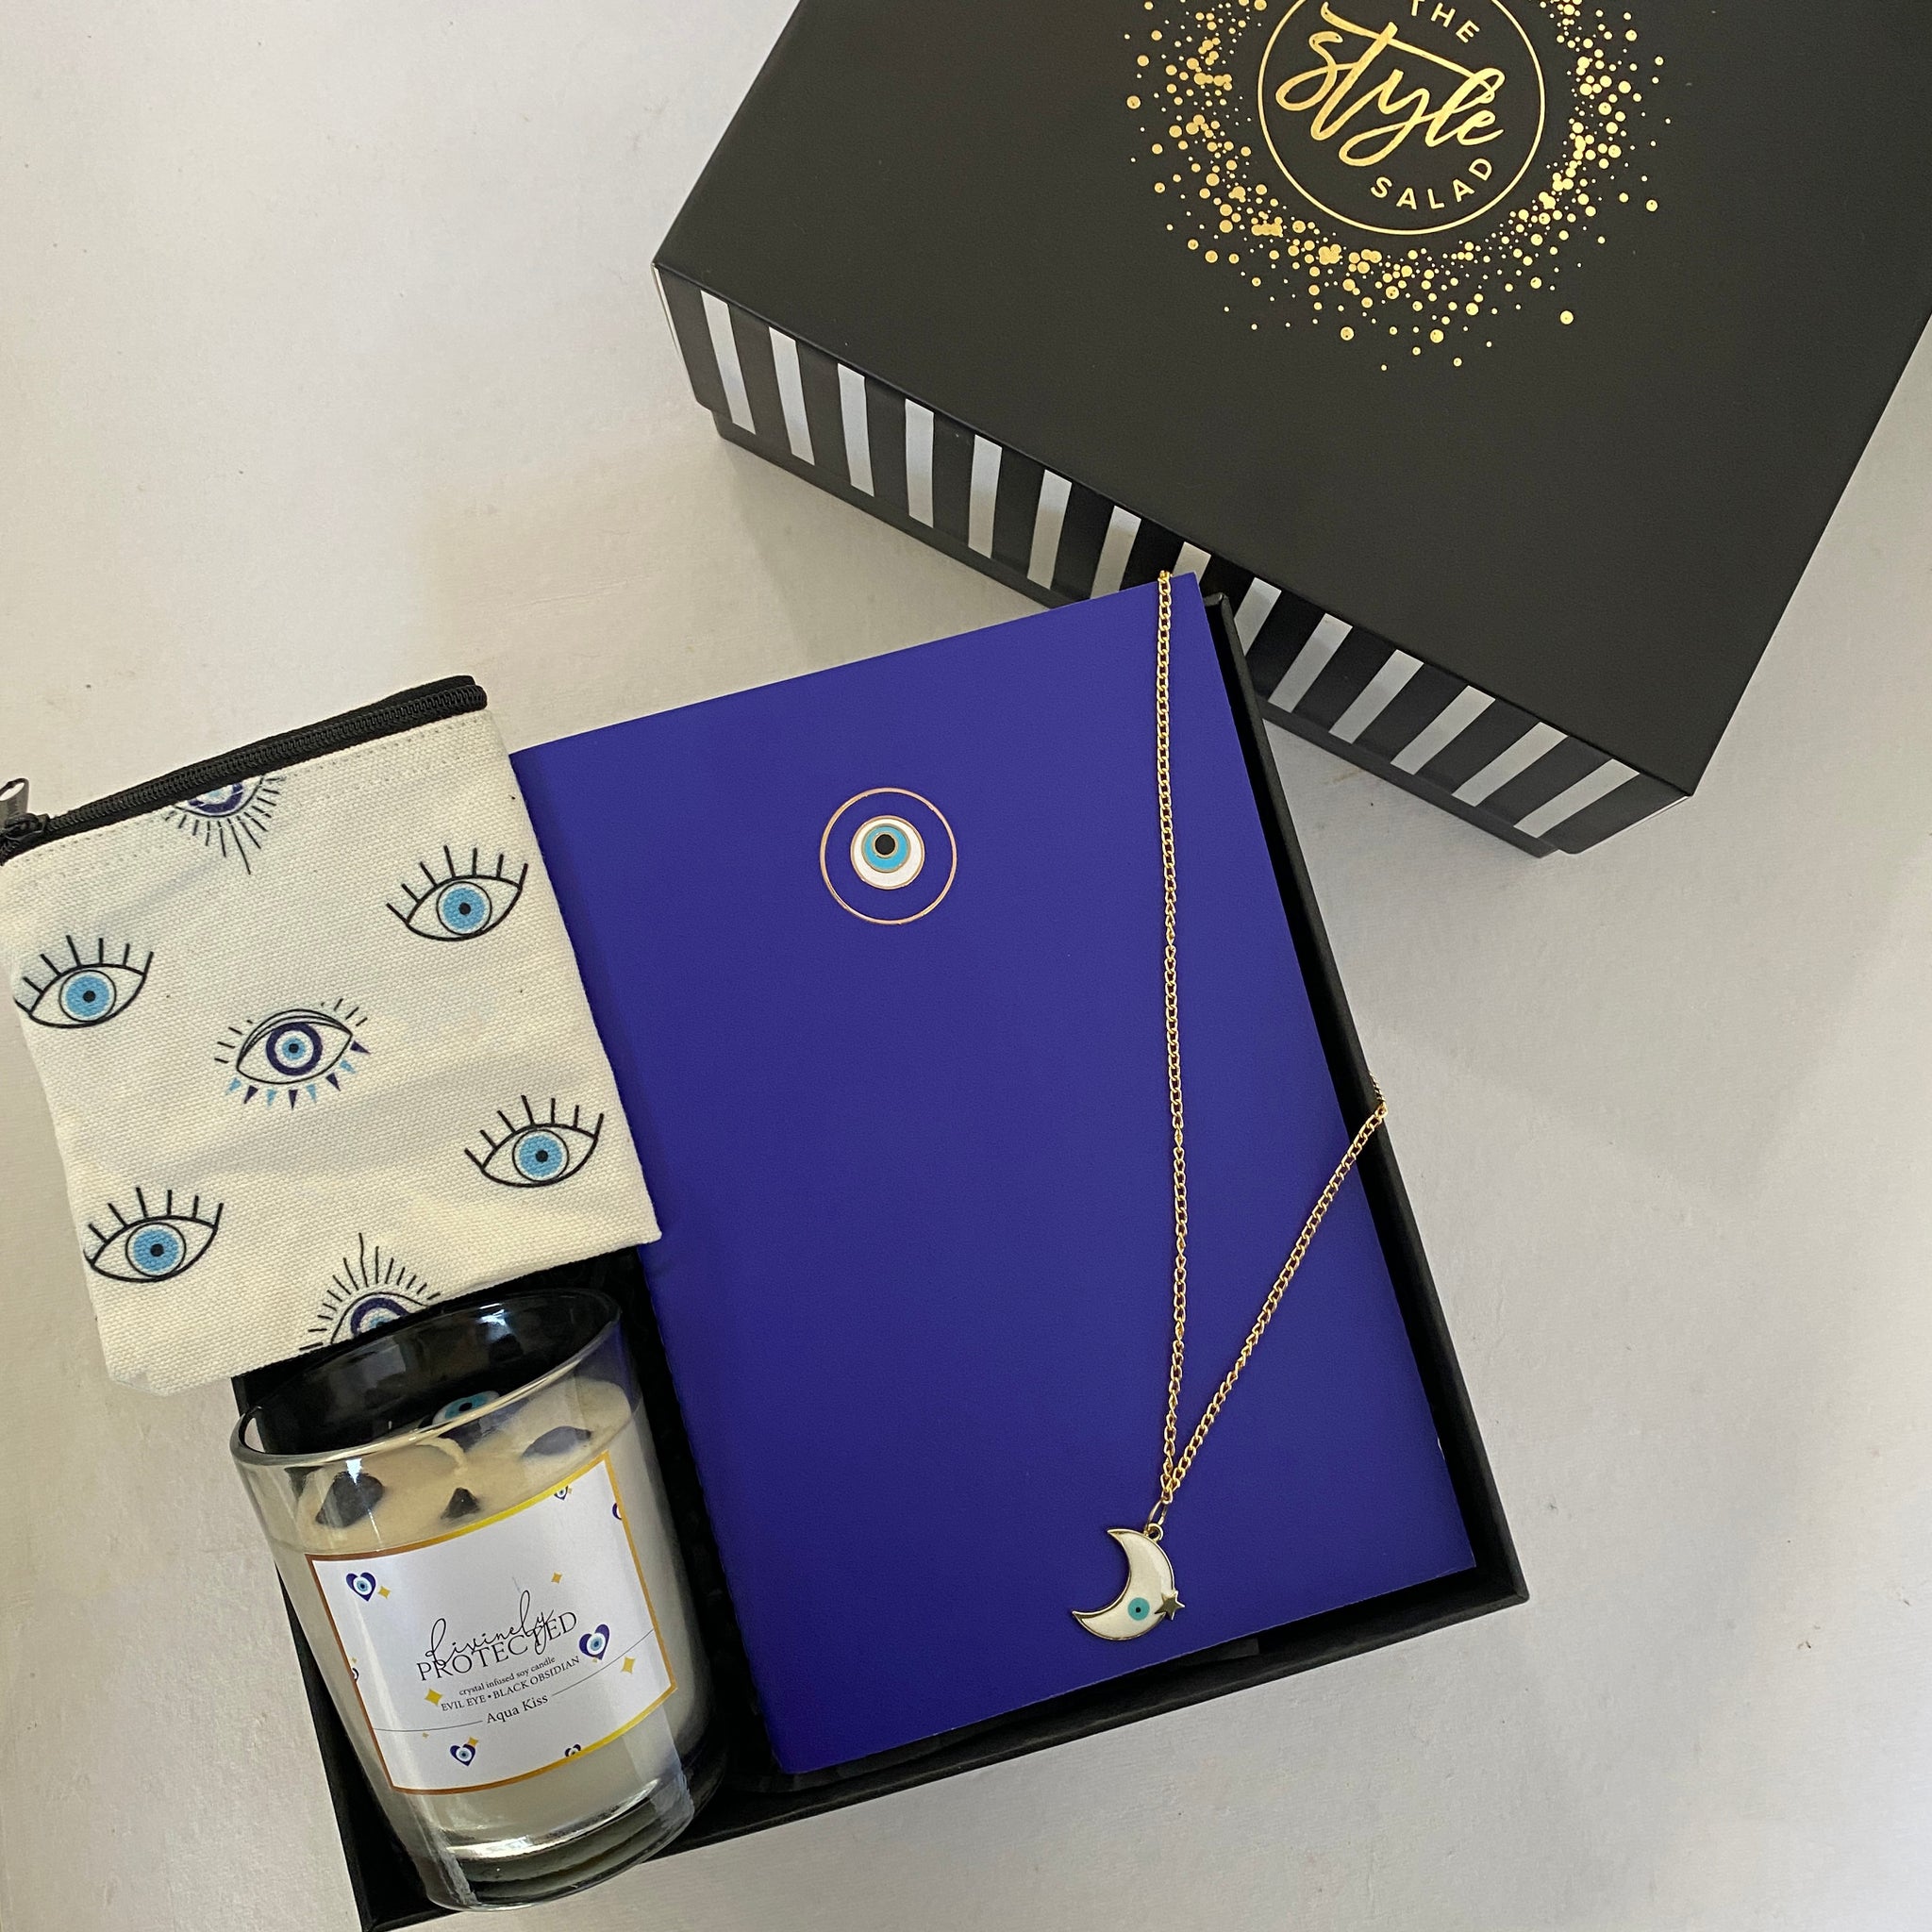 Evil eye gifts - the style salad